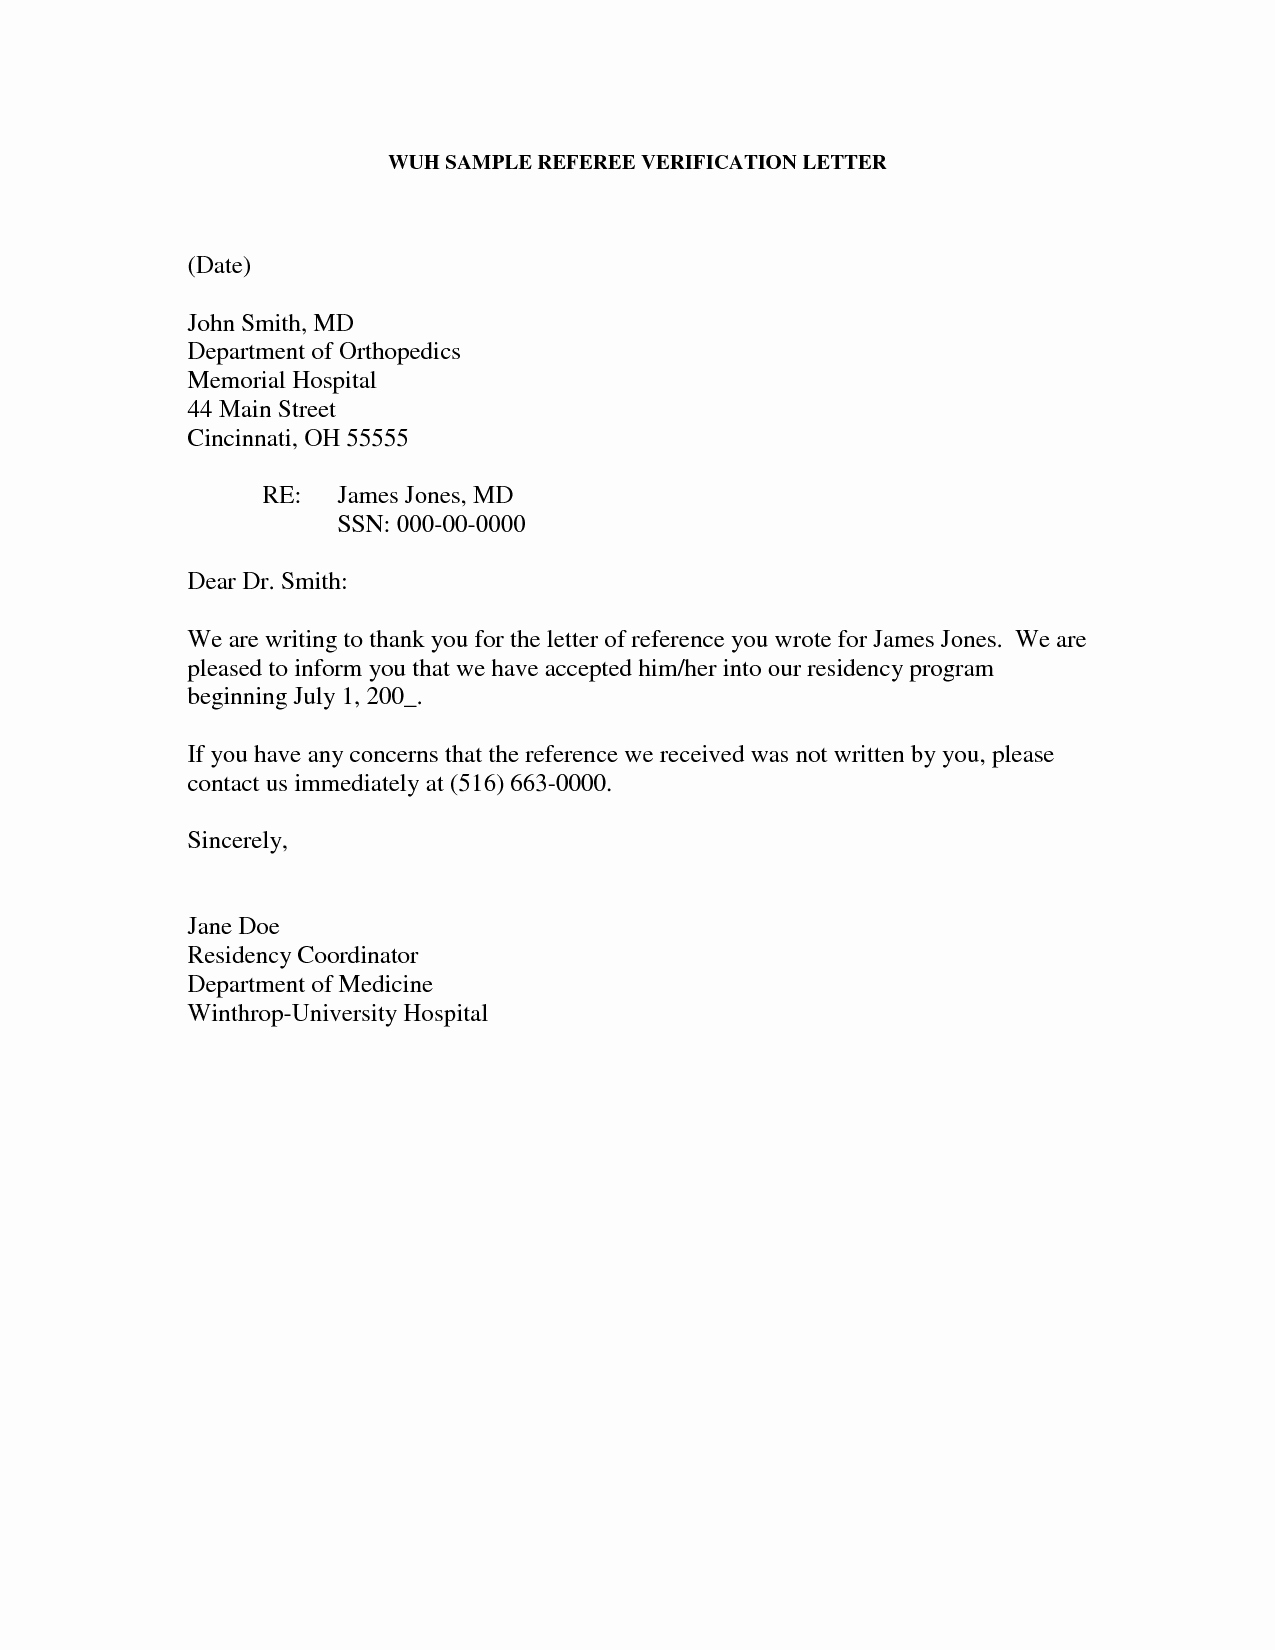 Proof Of Residency Letter Template Fresh Proof Residency Letter From Landlord Free Download